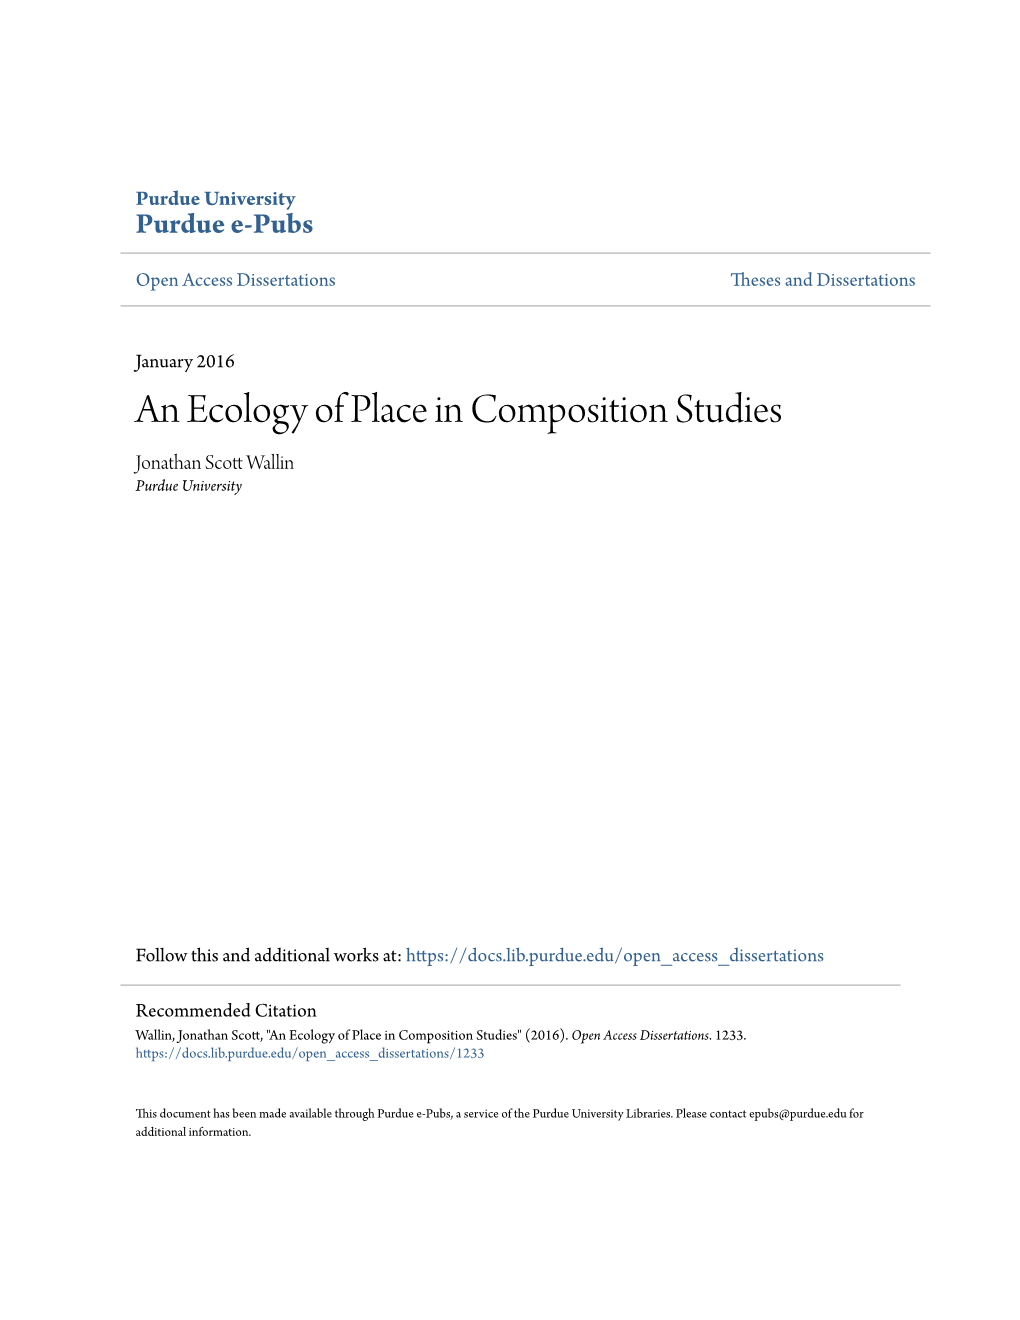 An Ecology of Place in Composition Studies Jonathan Scott Alw Lin Purdue University